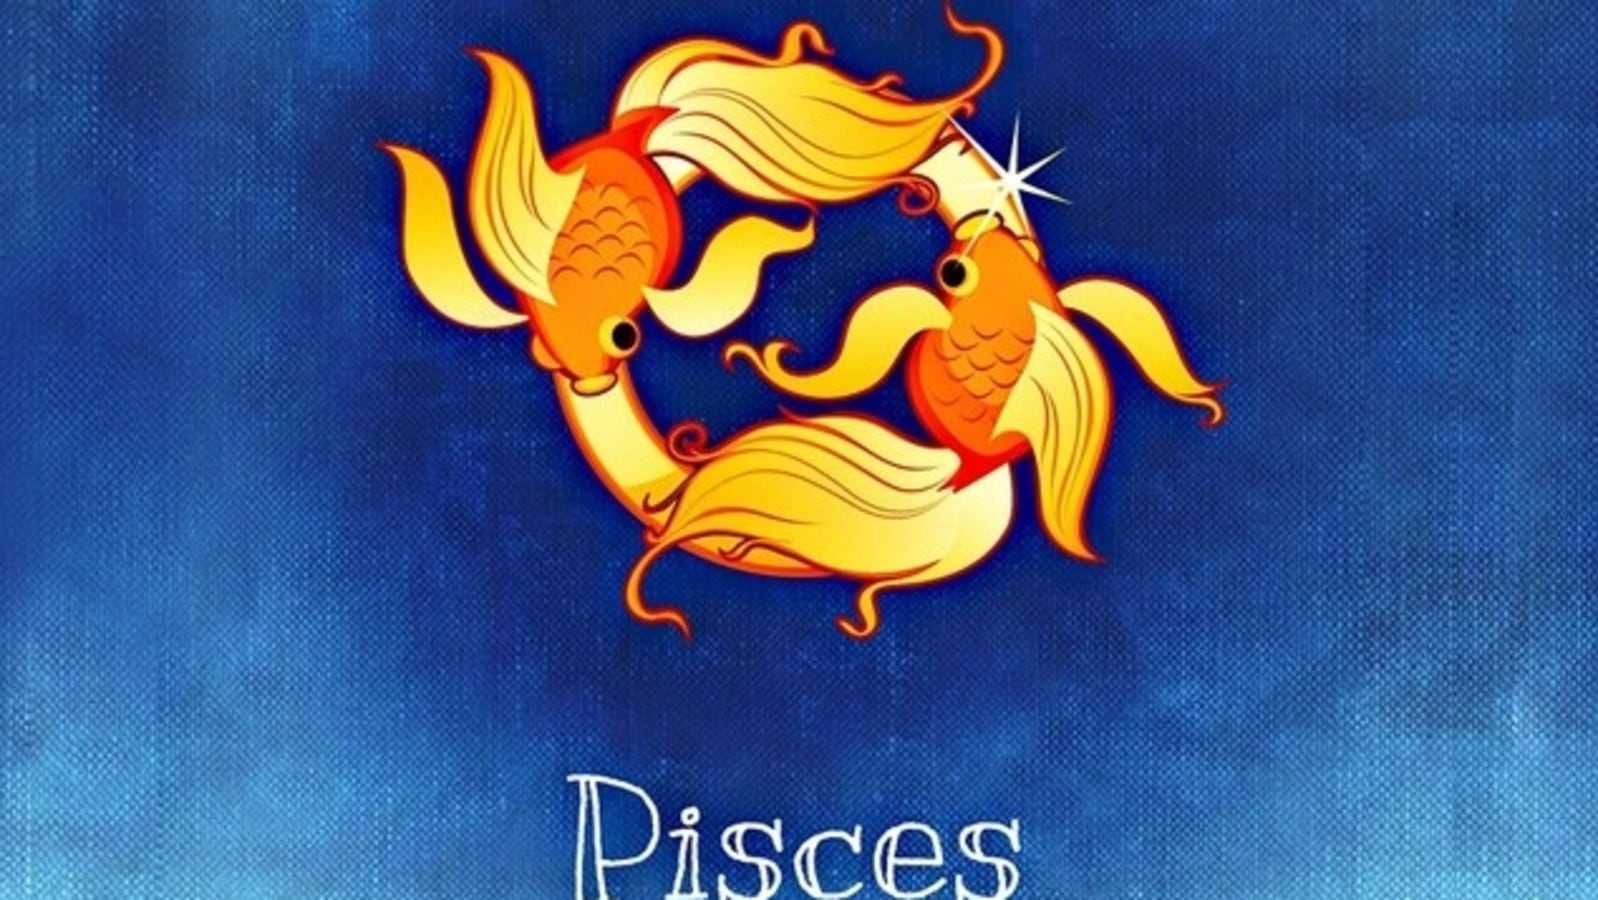 Pisces Daily Horoscope Astrological Prediction for August 20